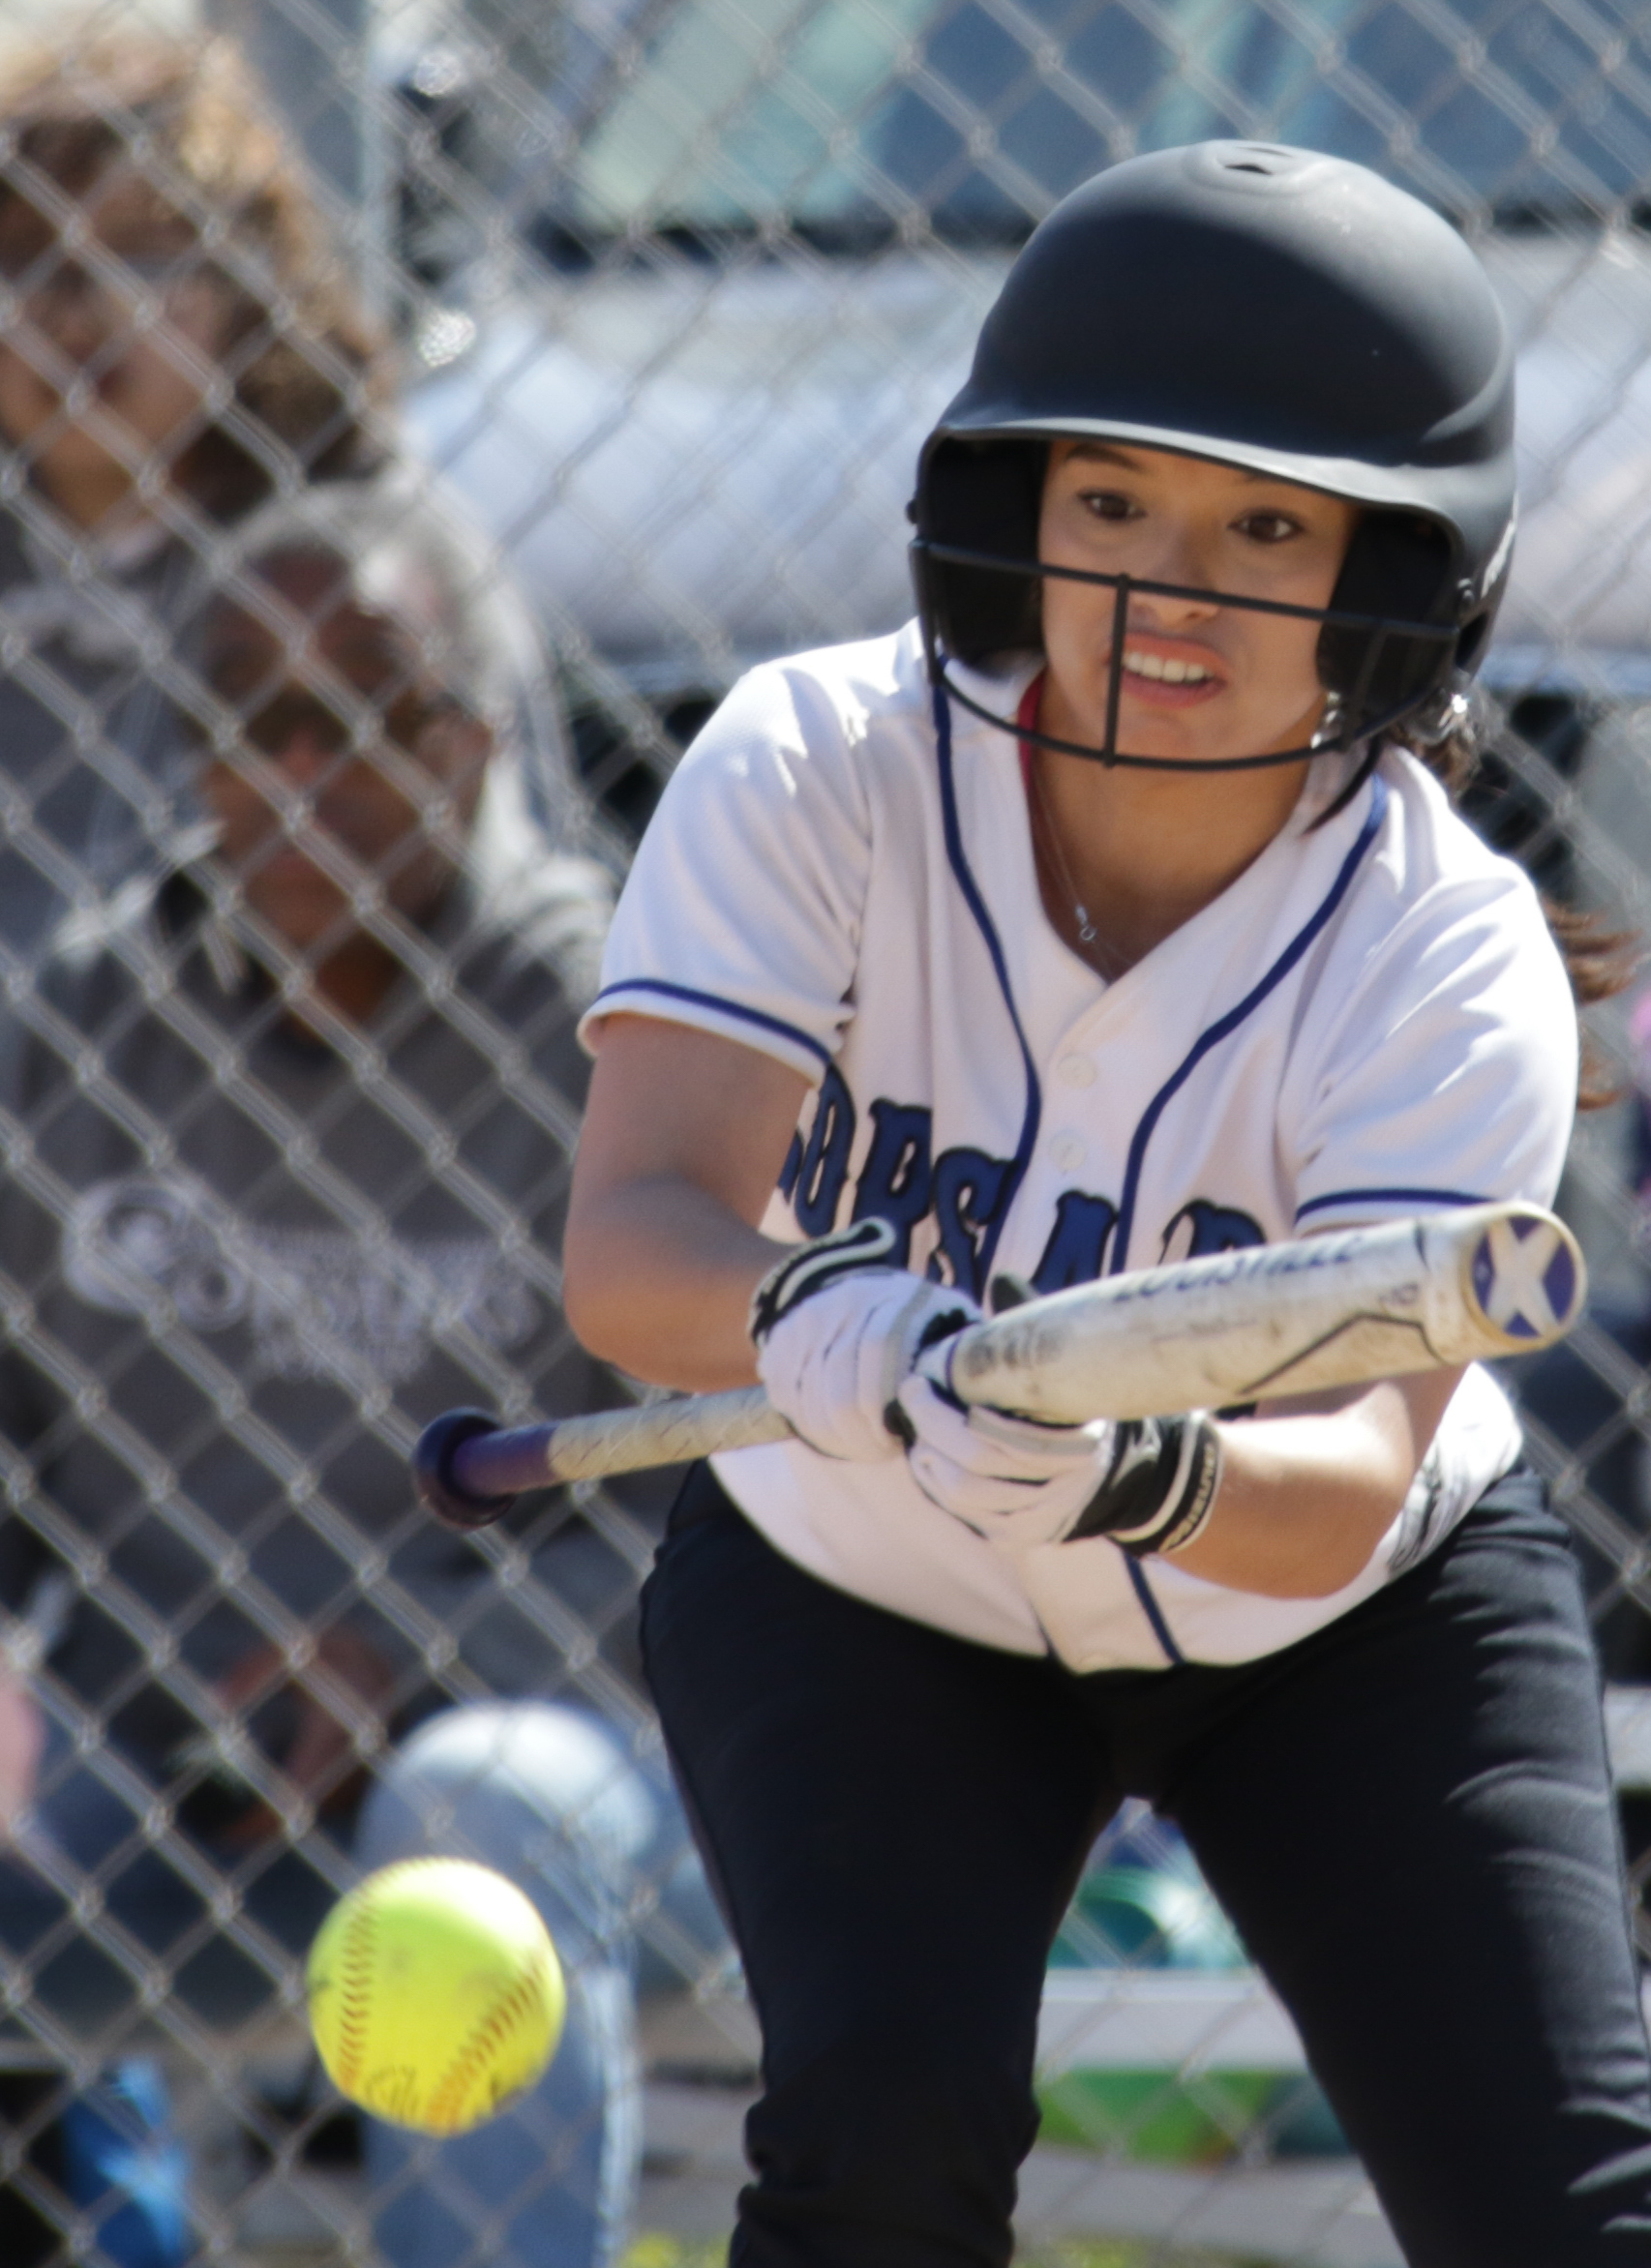  Santa Monica College Corsair softball team batter Aliza Chacon (#3) attempts to bunt the ball during their game against Oxnard College on thursday, April 19th, 2018. The game ended 3-2 in favor for Santa Monica College. (Santa Monica, California, Th